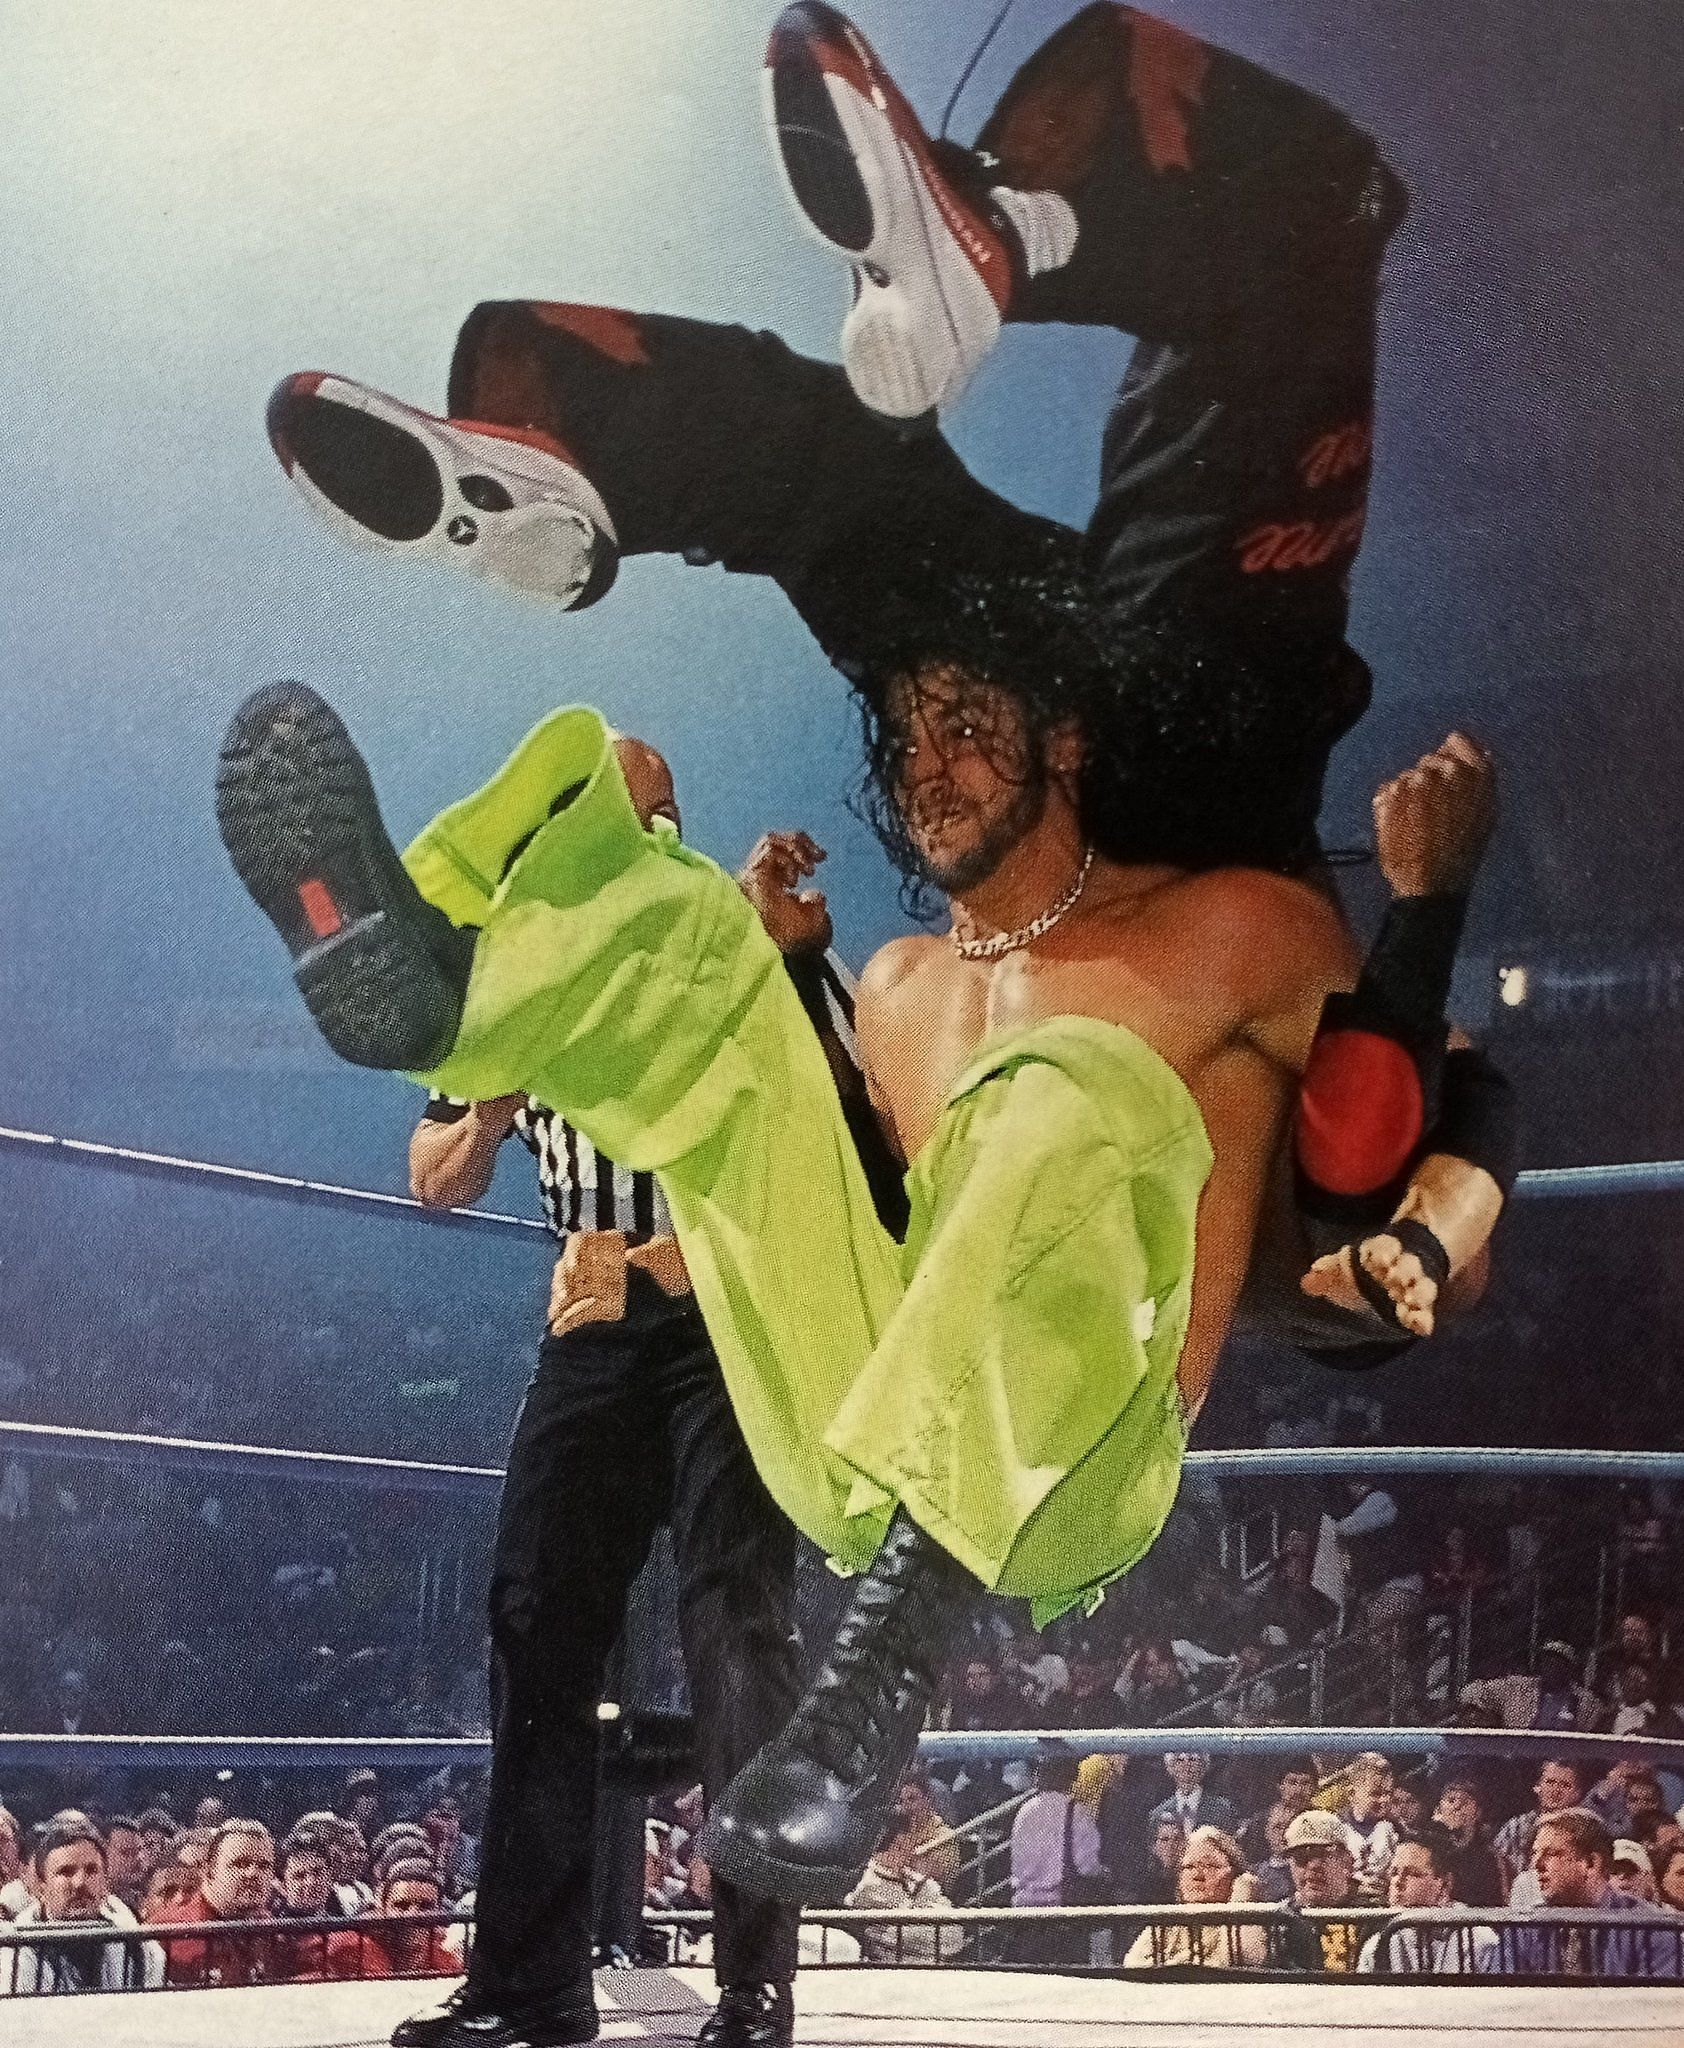 Gregory Helms as &quot;Sugar Shane Helms&quot; in WCW, performing his iconic finisher- &quot;The Vertebreaker&quot;